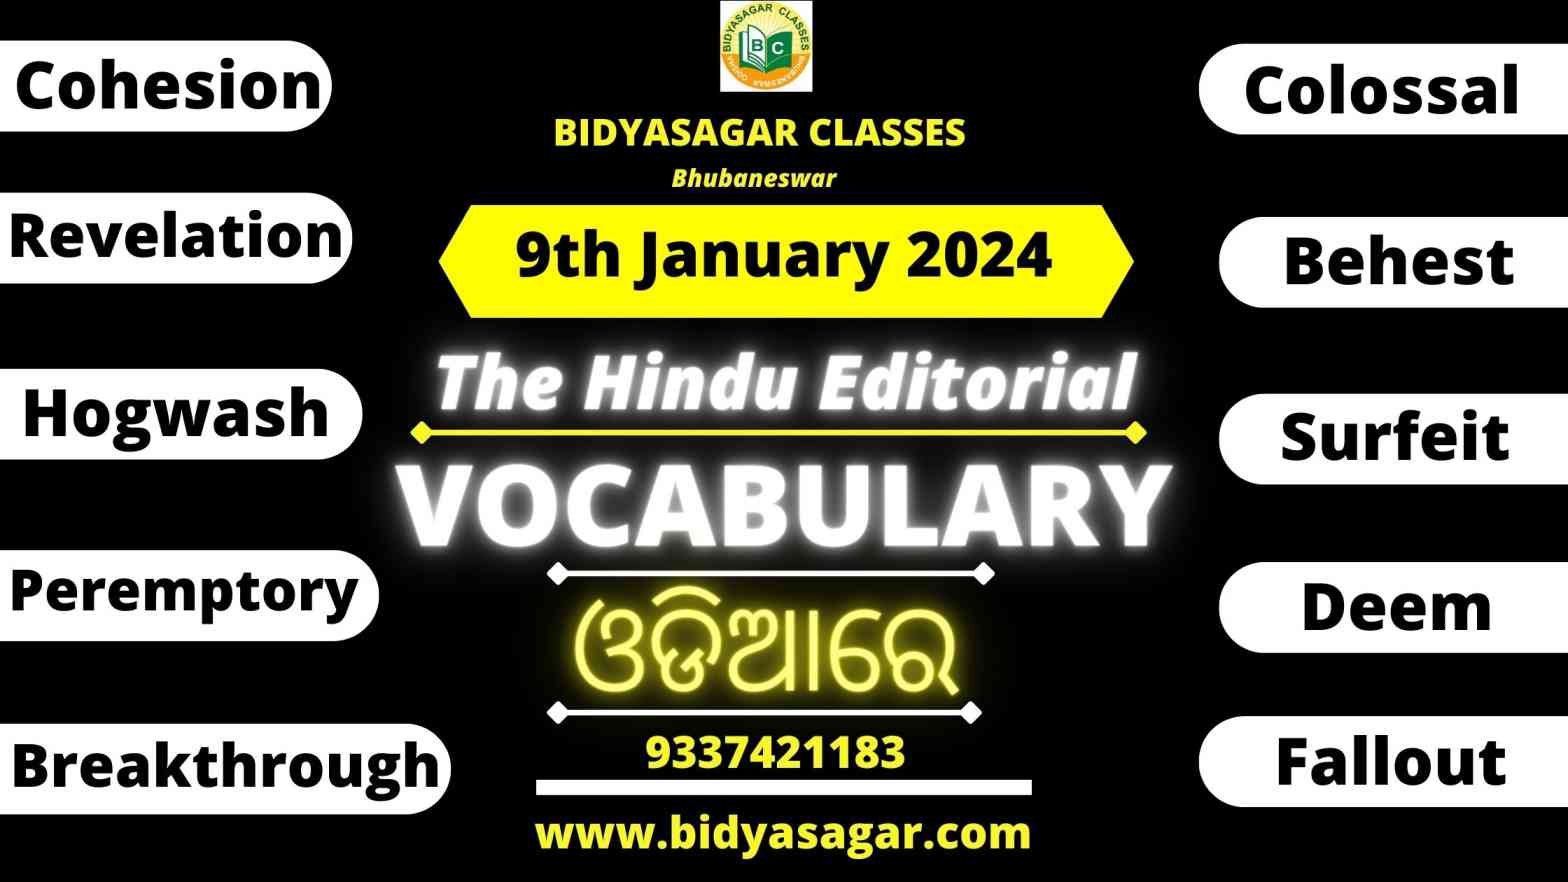 The Hindu Editorial Vocabulary of 9th January 2024